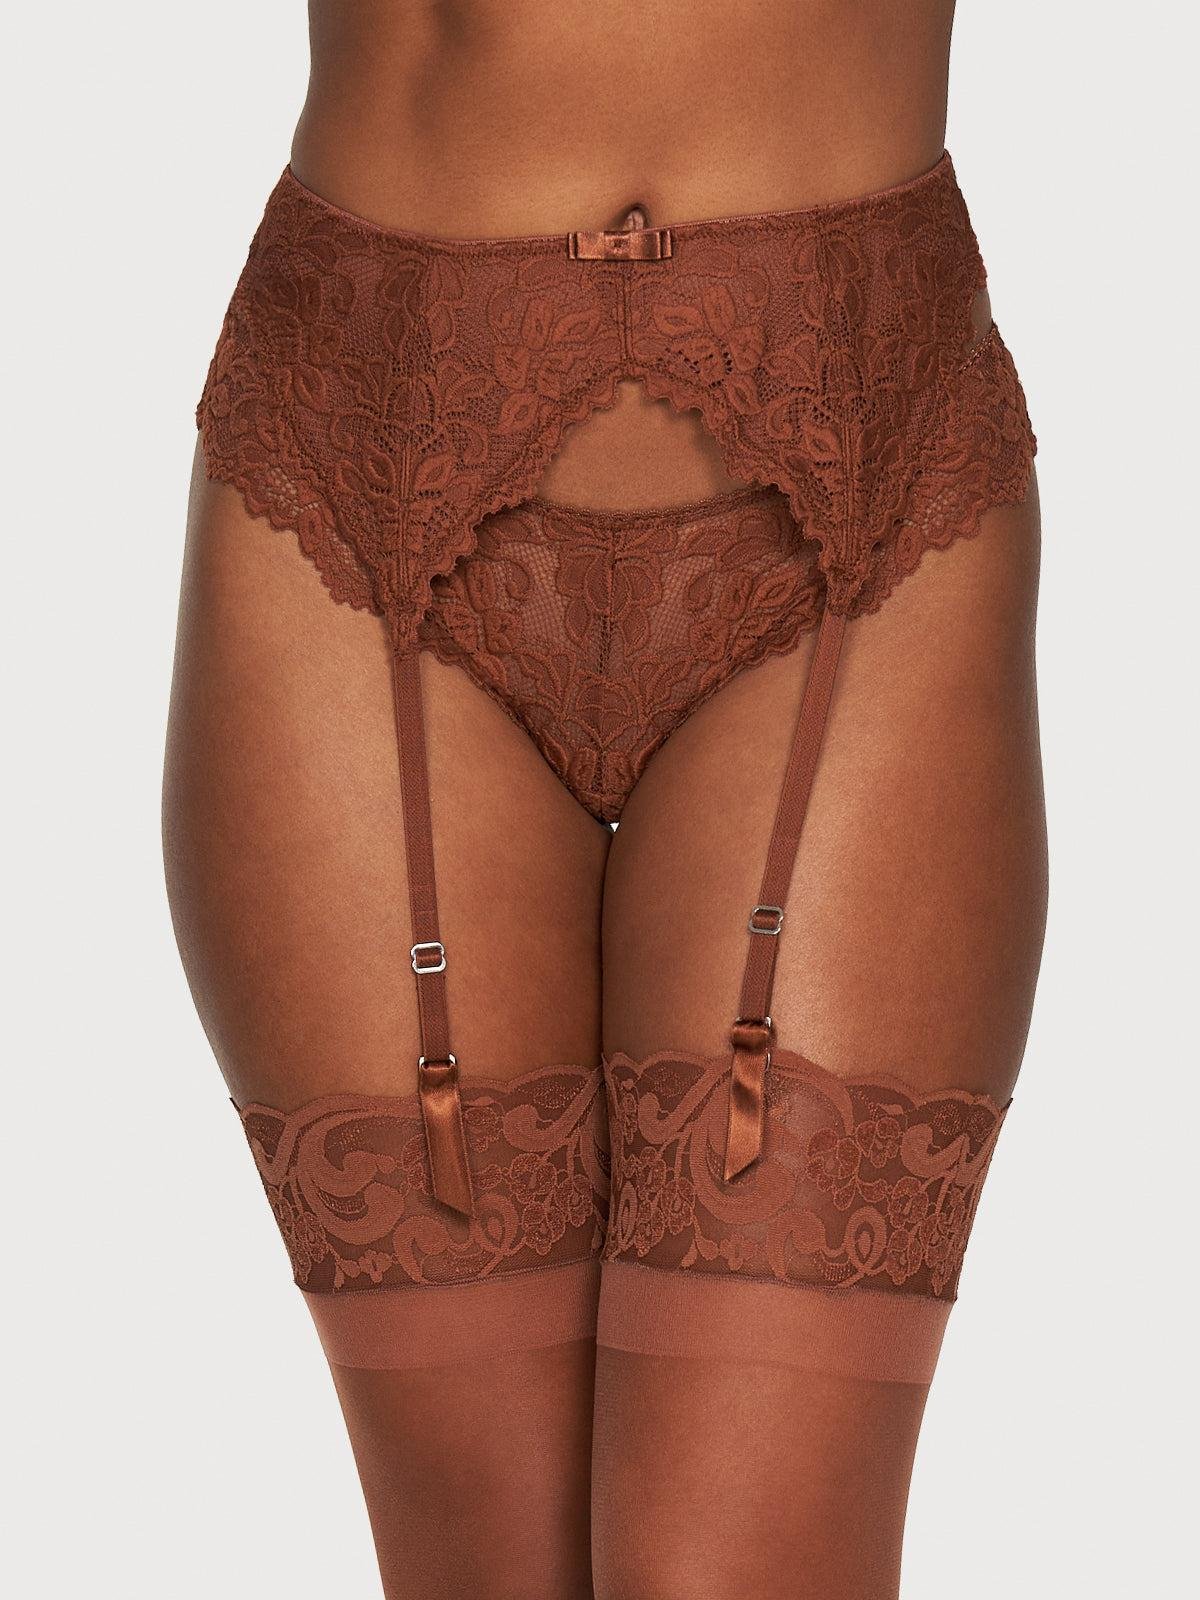 Jessica Lace Garter Belt in Coco by FREDERICK'S OF HOLLYWOOD